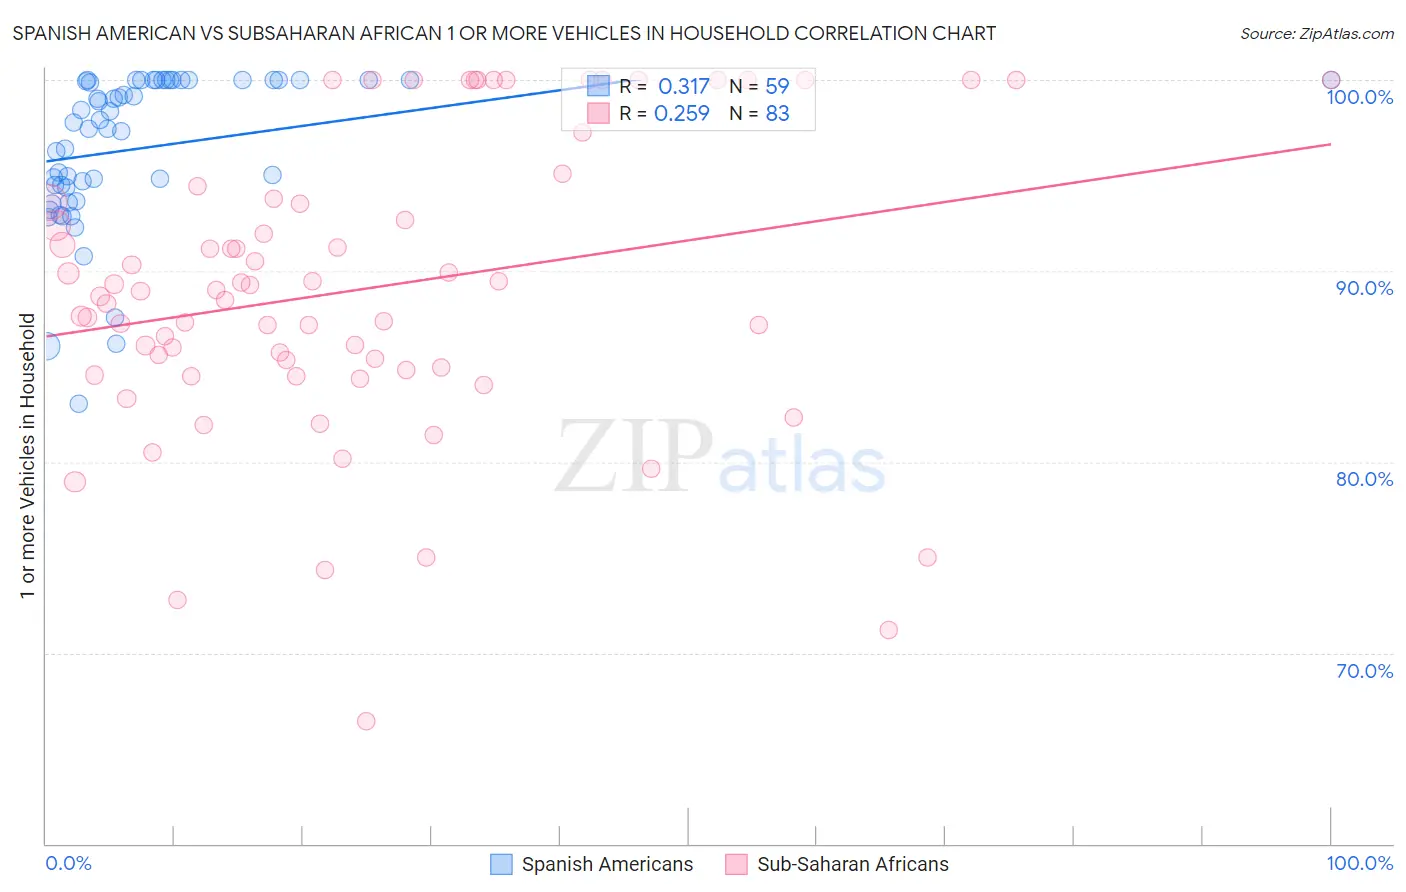 Spanish American vs Subsaharan African 1 or more Vehicles in Household